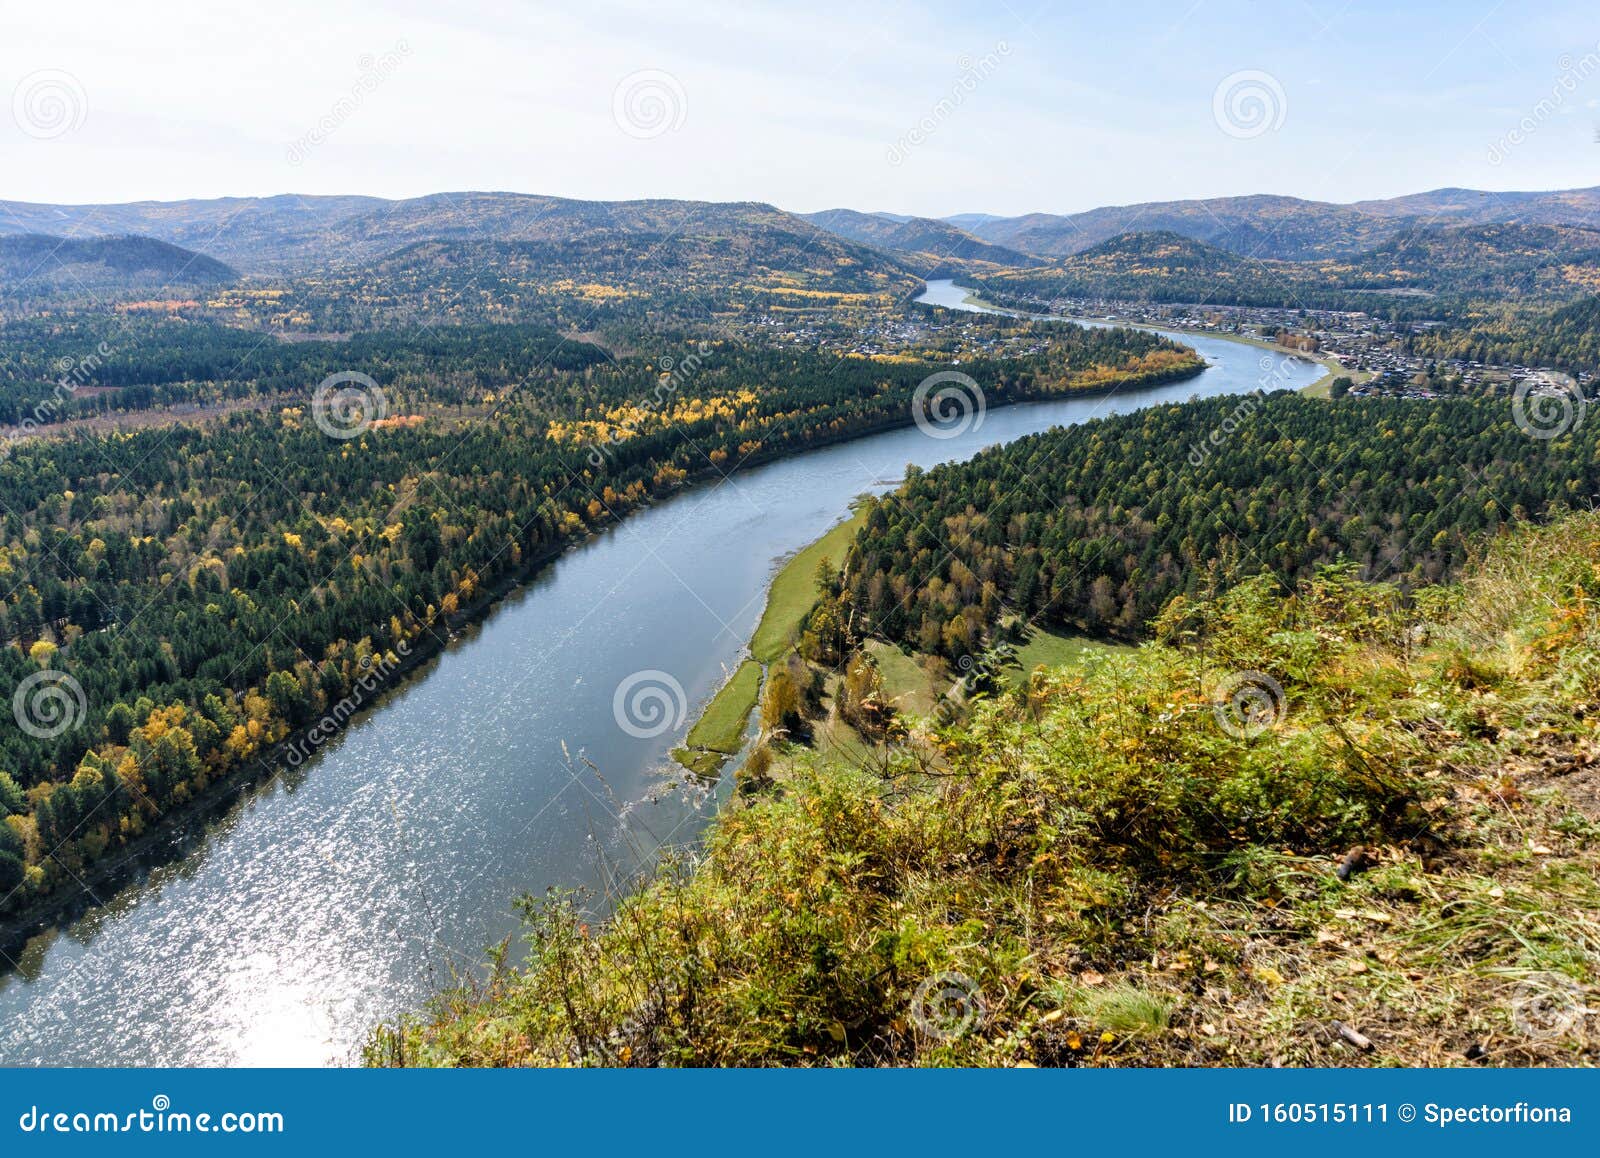 River Rock And Autumn Forest View From Above Stock Image Image Of